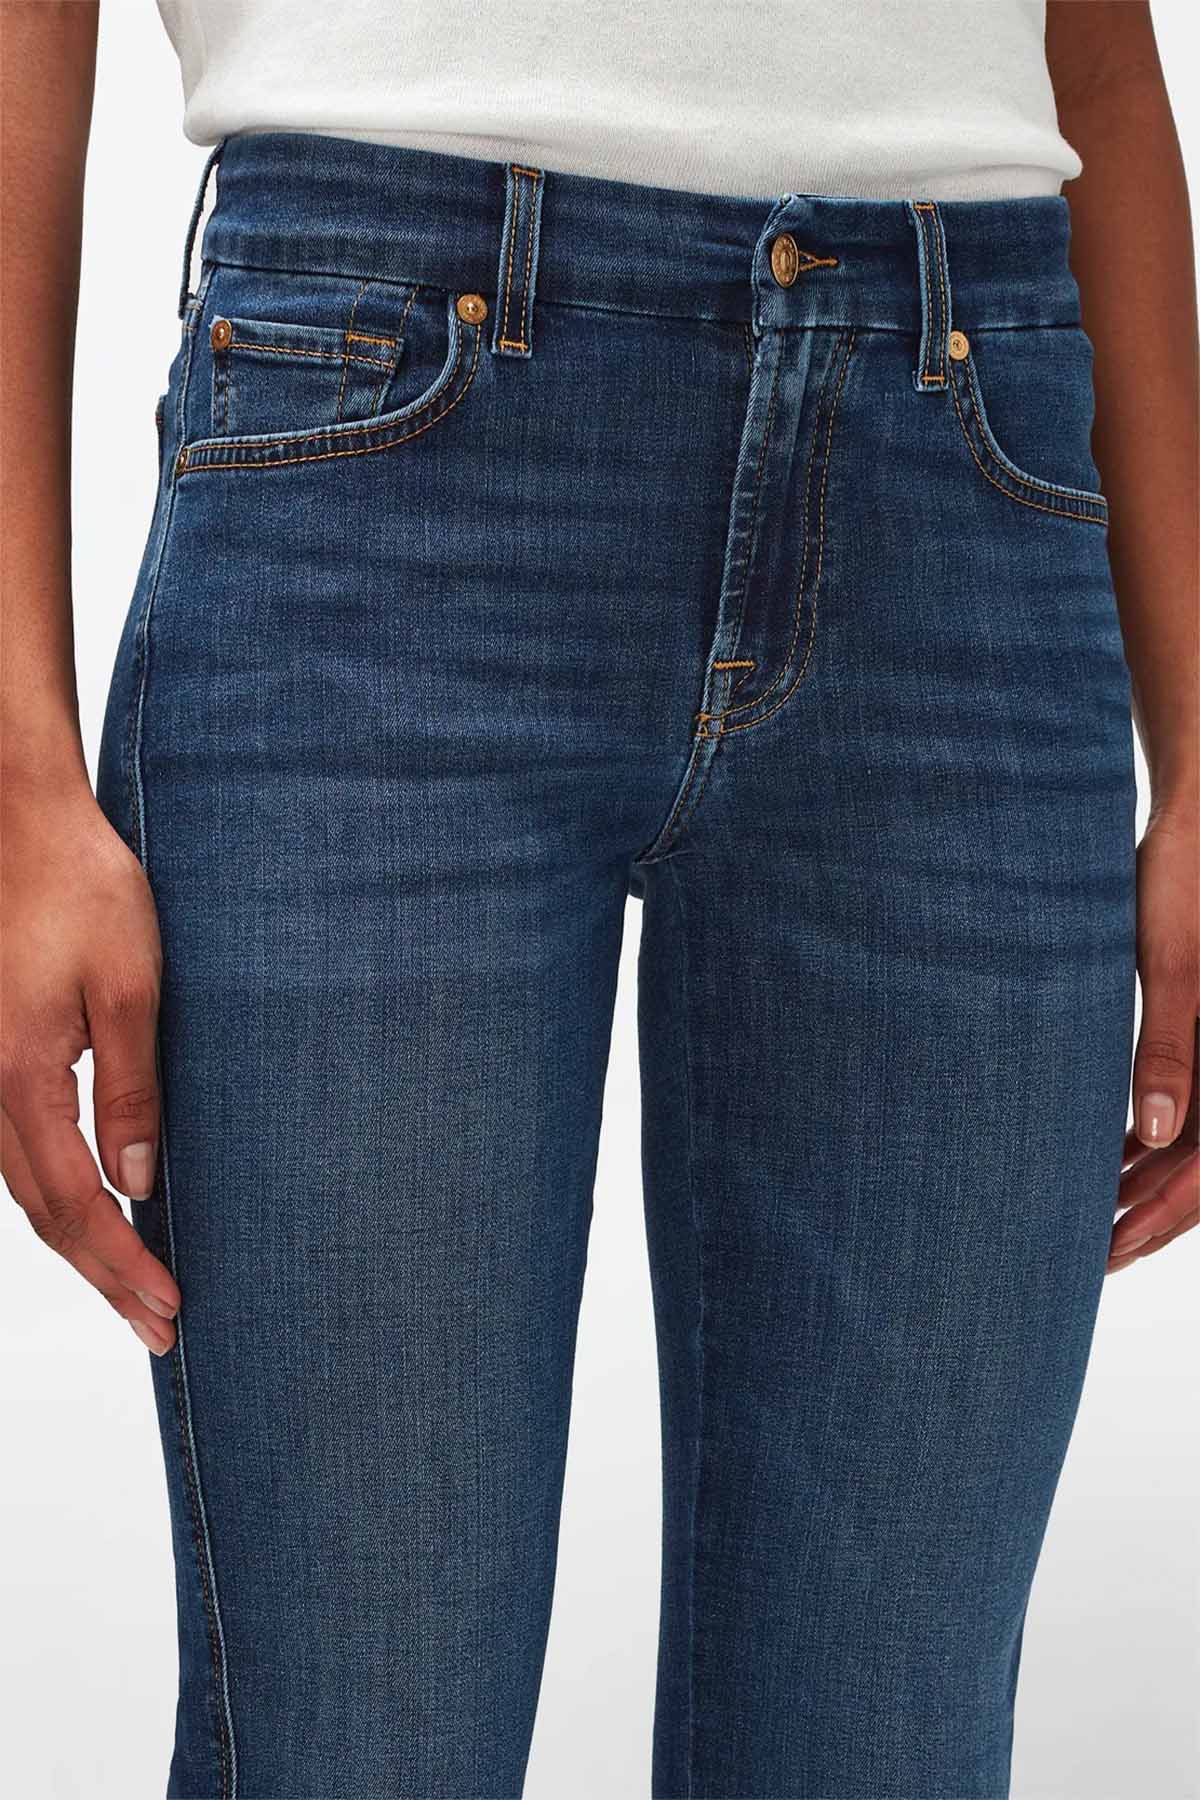 7 For All Mankind Kimmie B Air Straight Fit Jeans-Libas Trendy Fashion Store